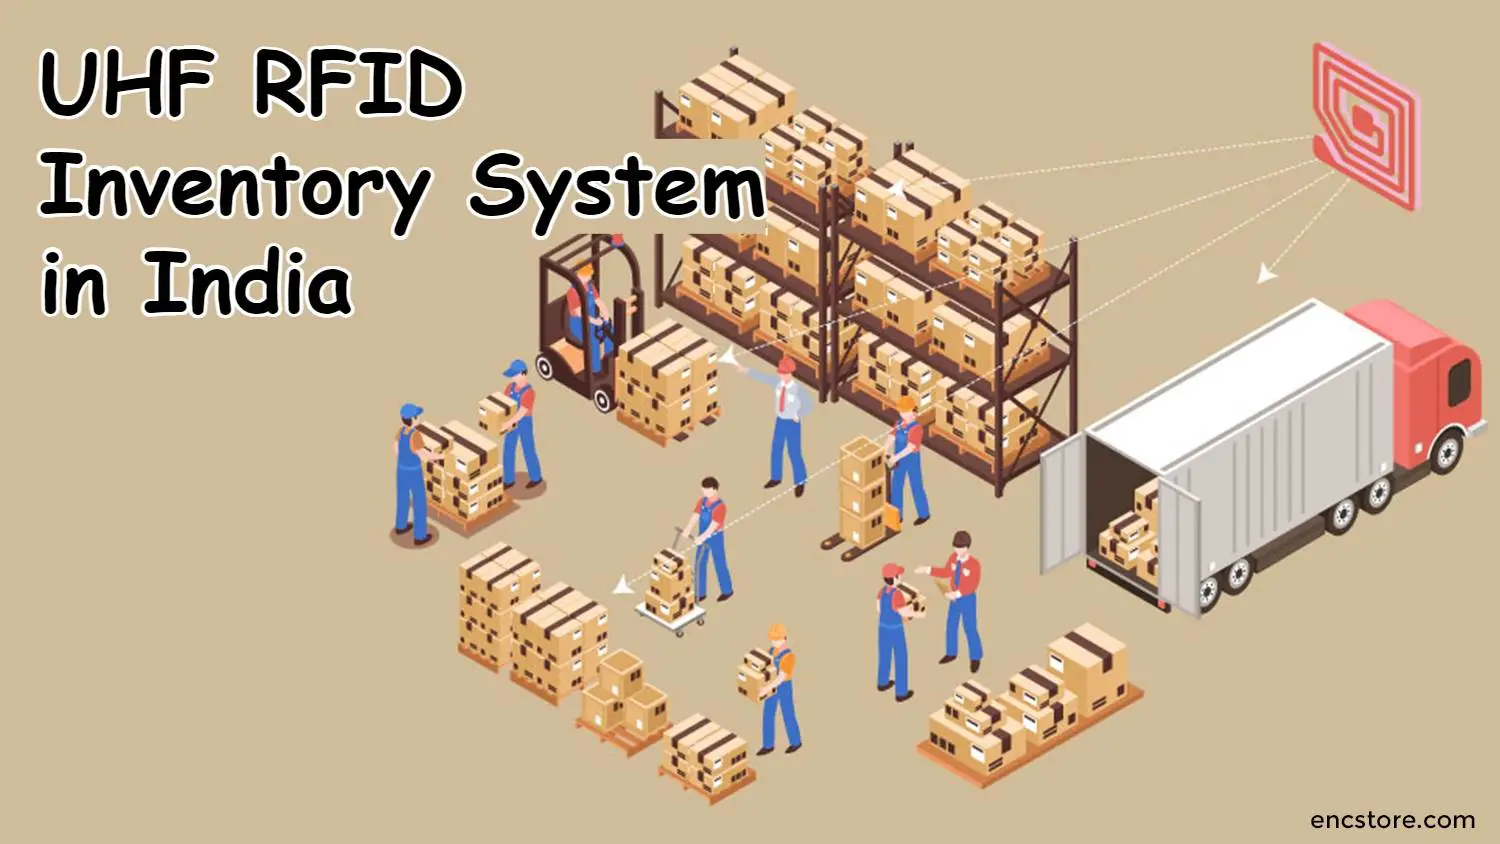 UHF RFID Inventory System in India